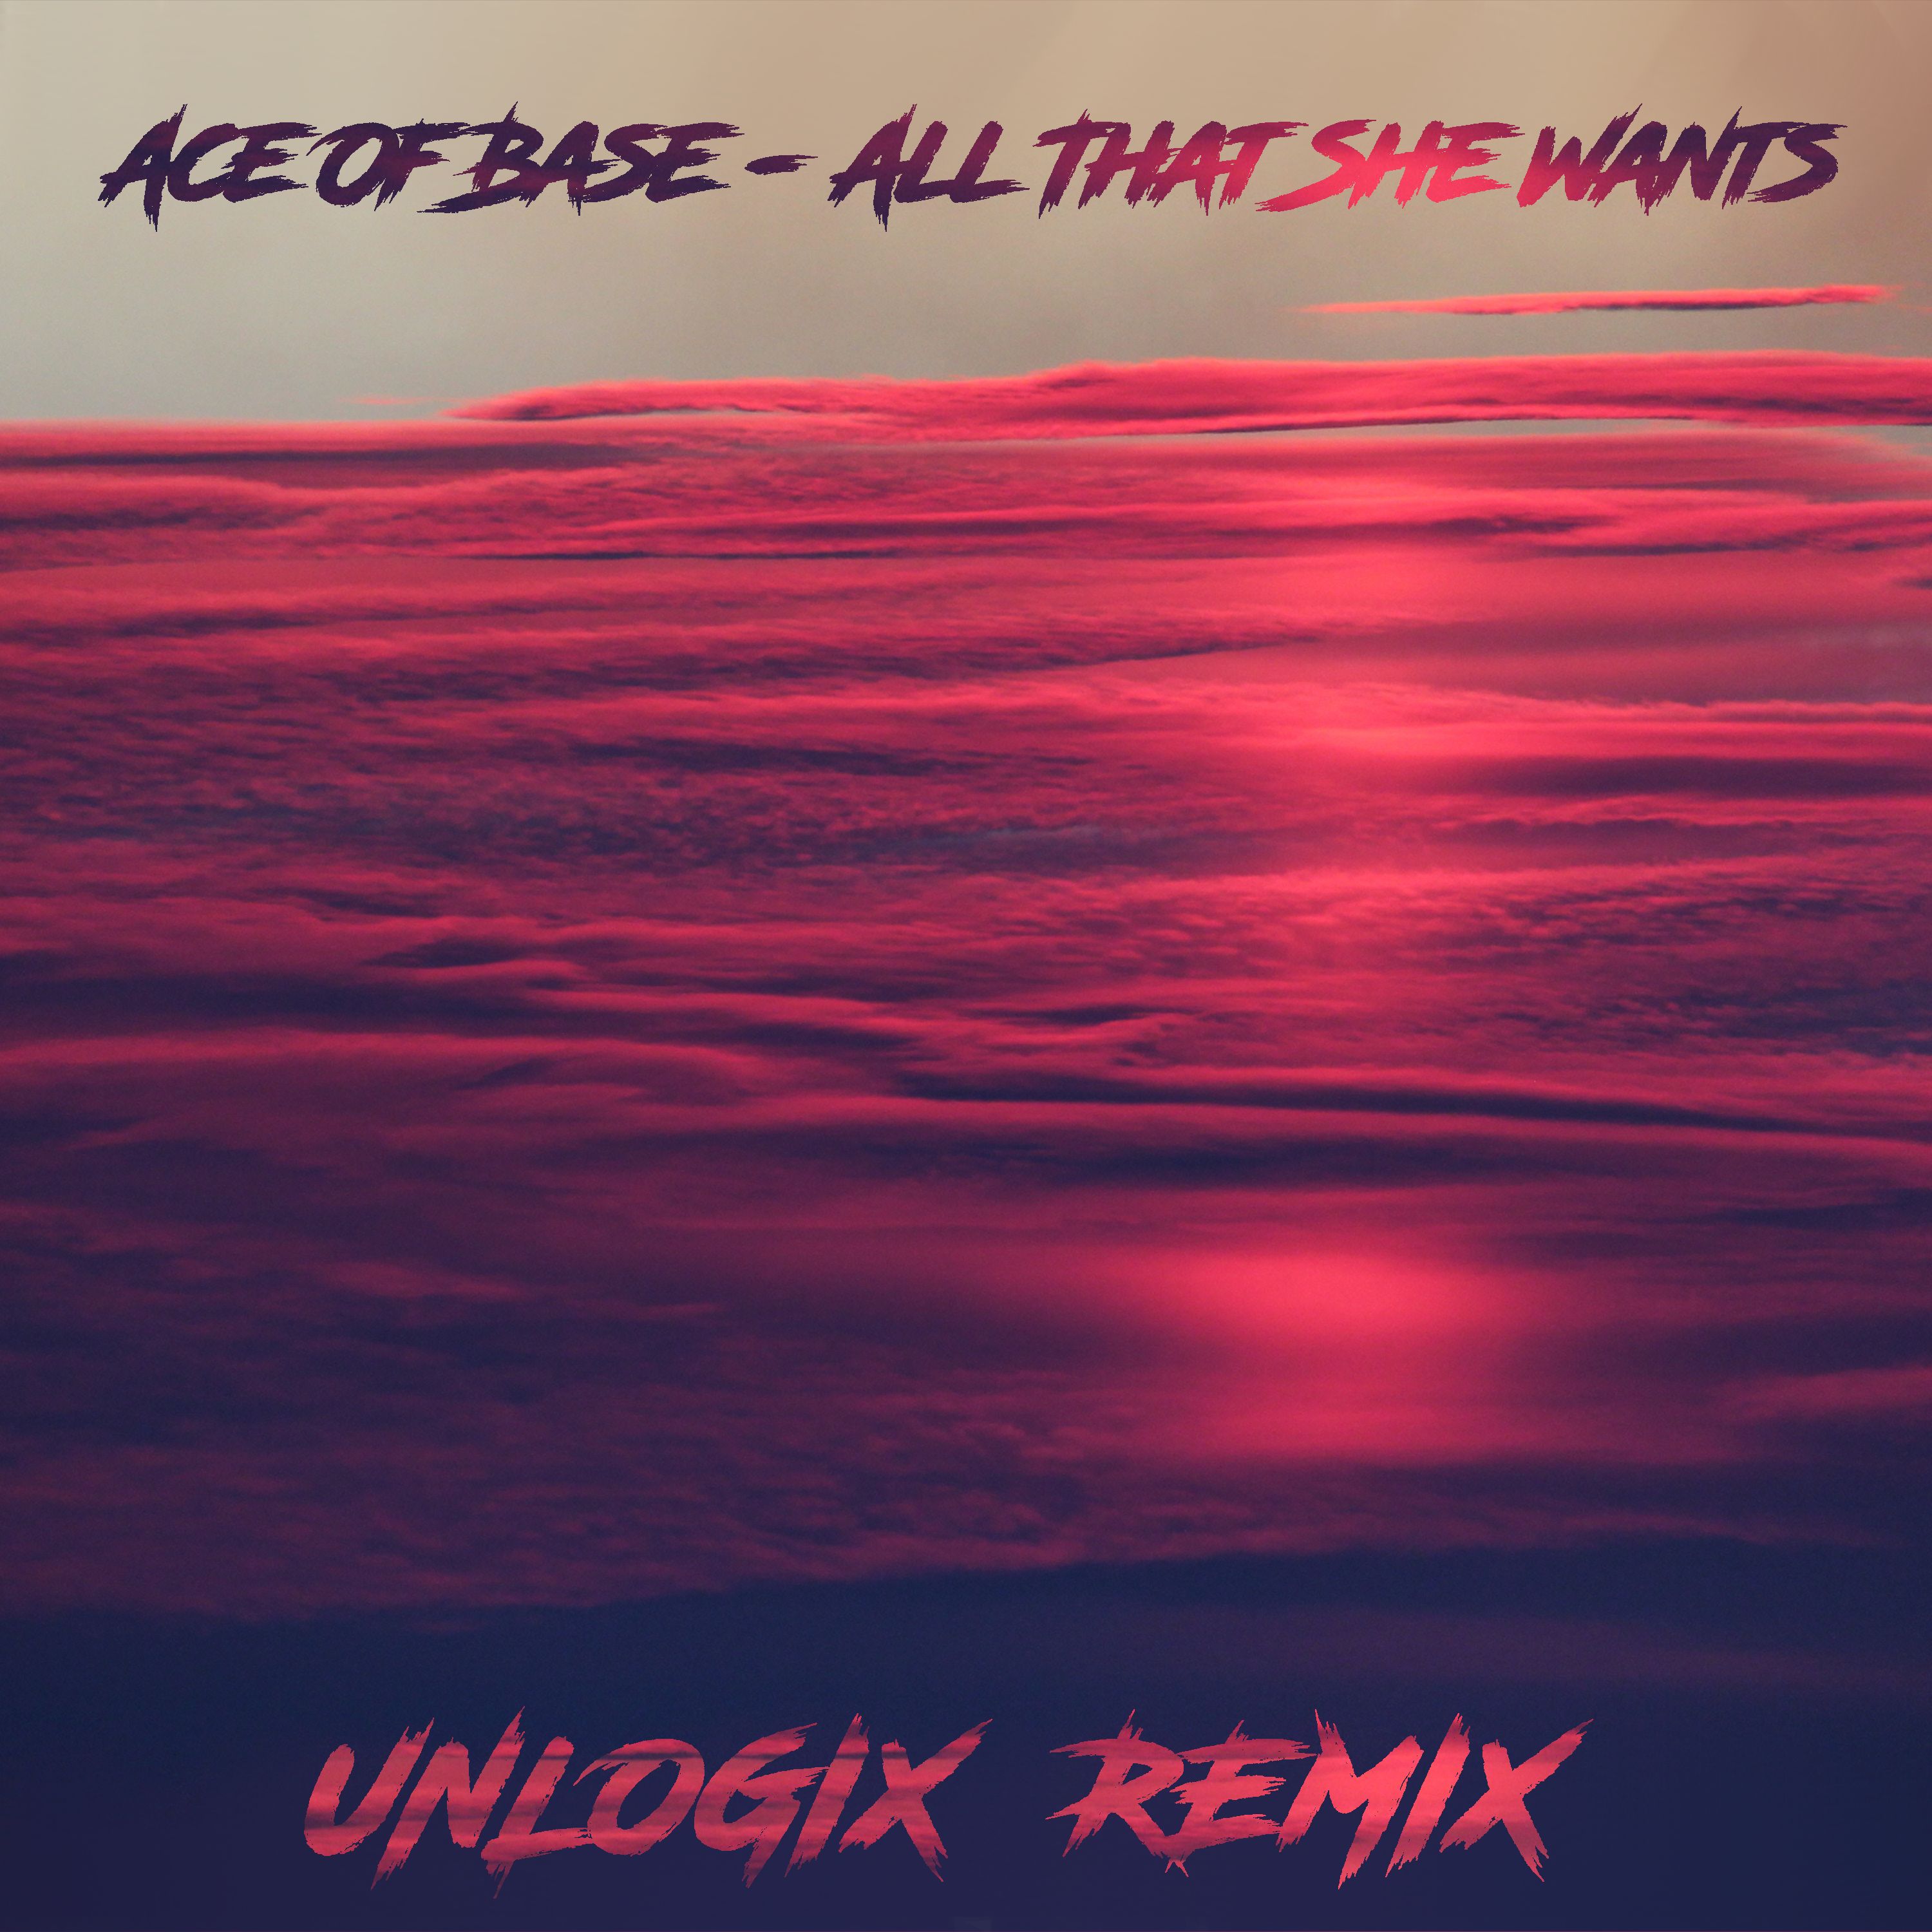 Scaricamento Ace Of Base - All That She Wants ( Unlogix Remix ) "FREE DOWNLOAD"